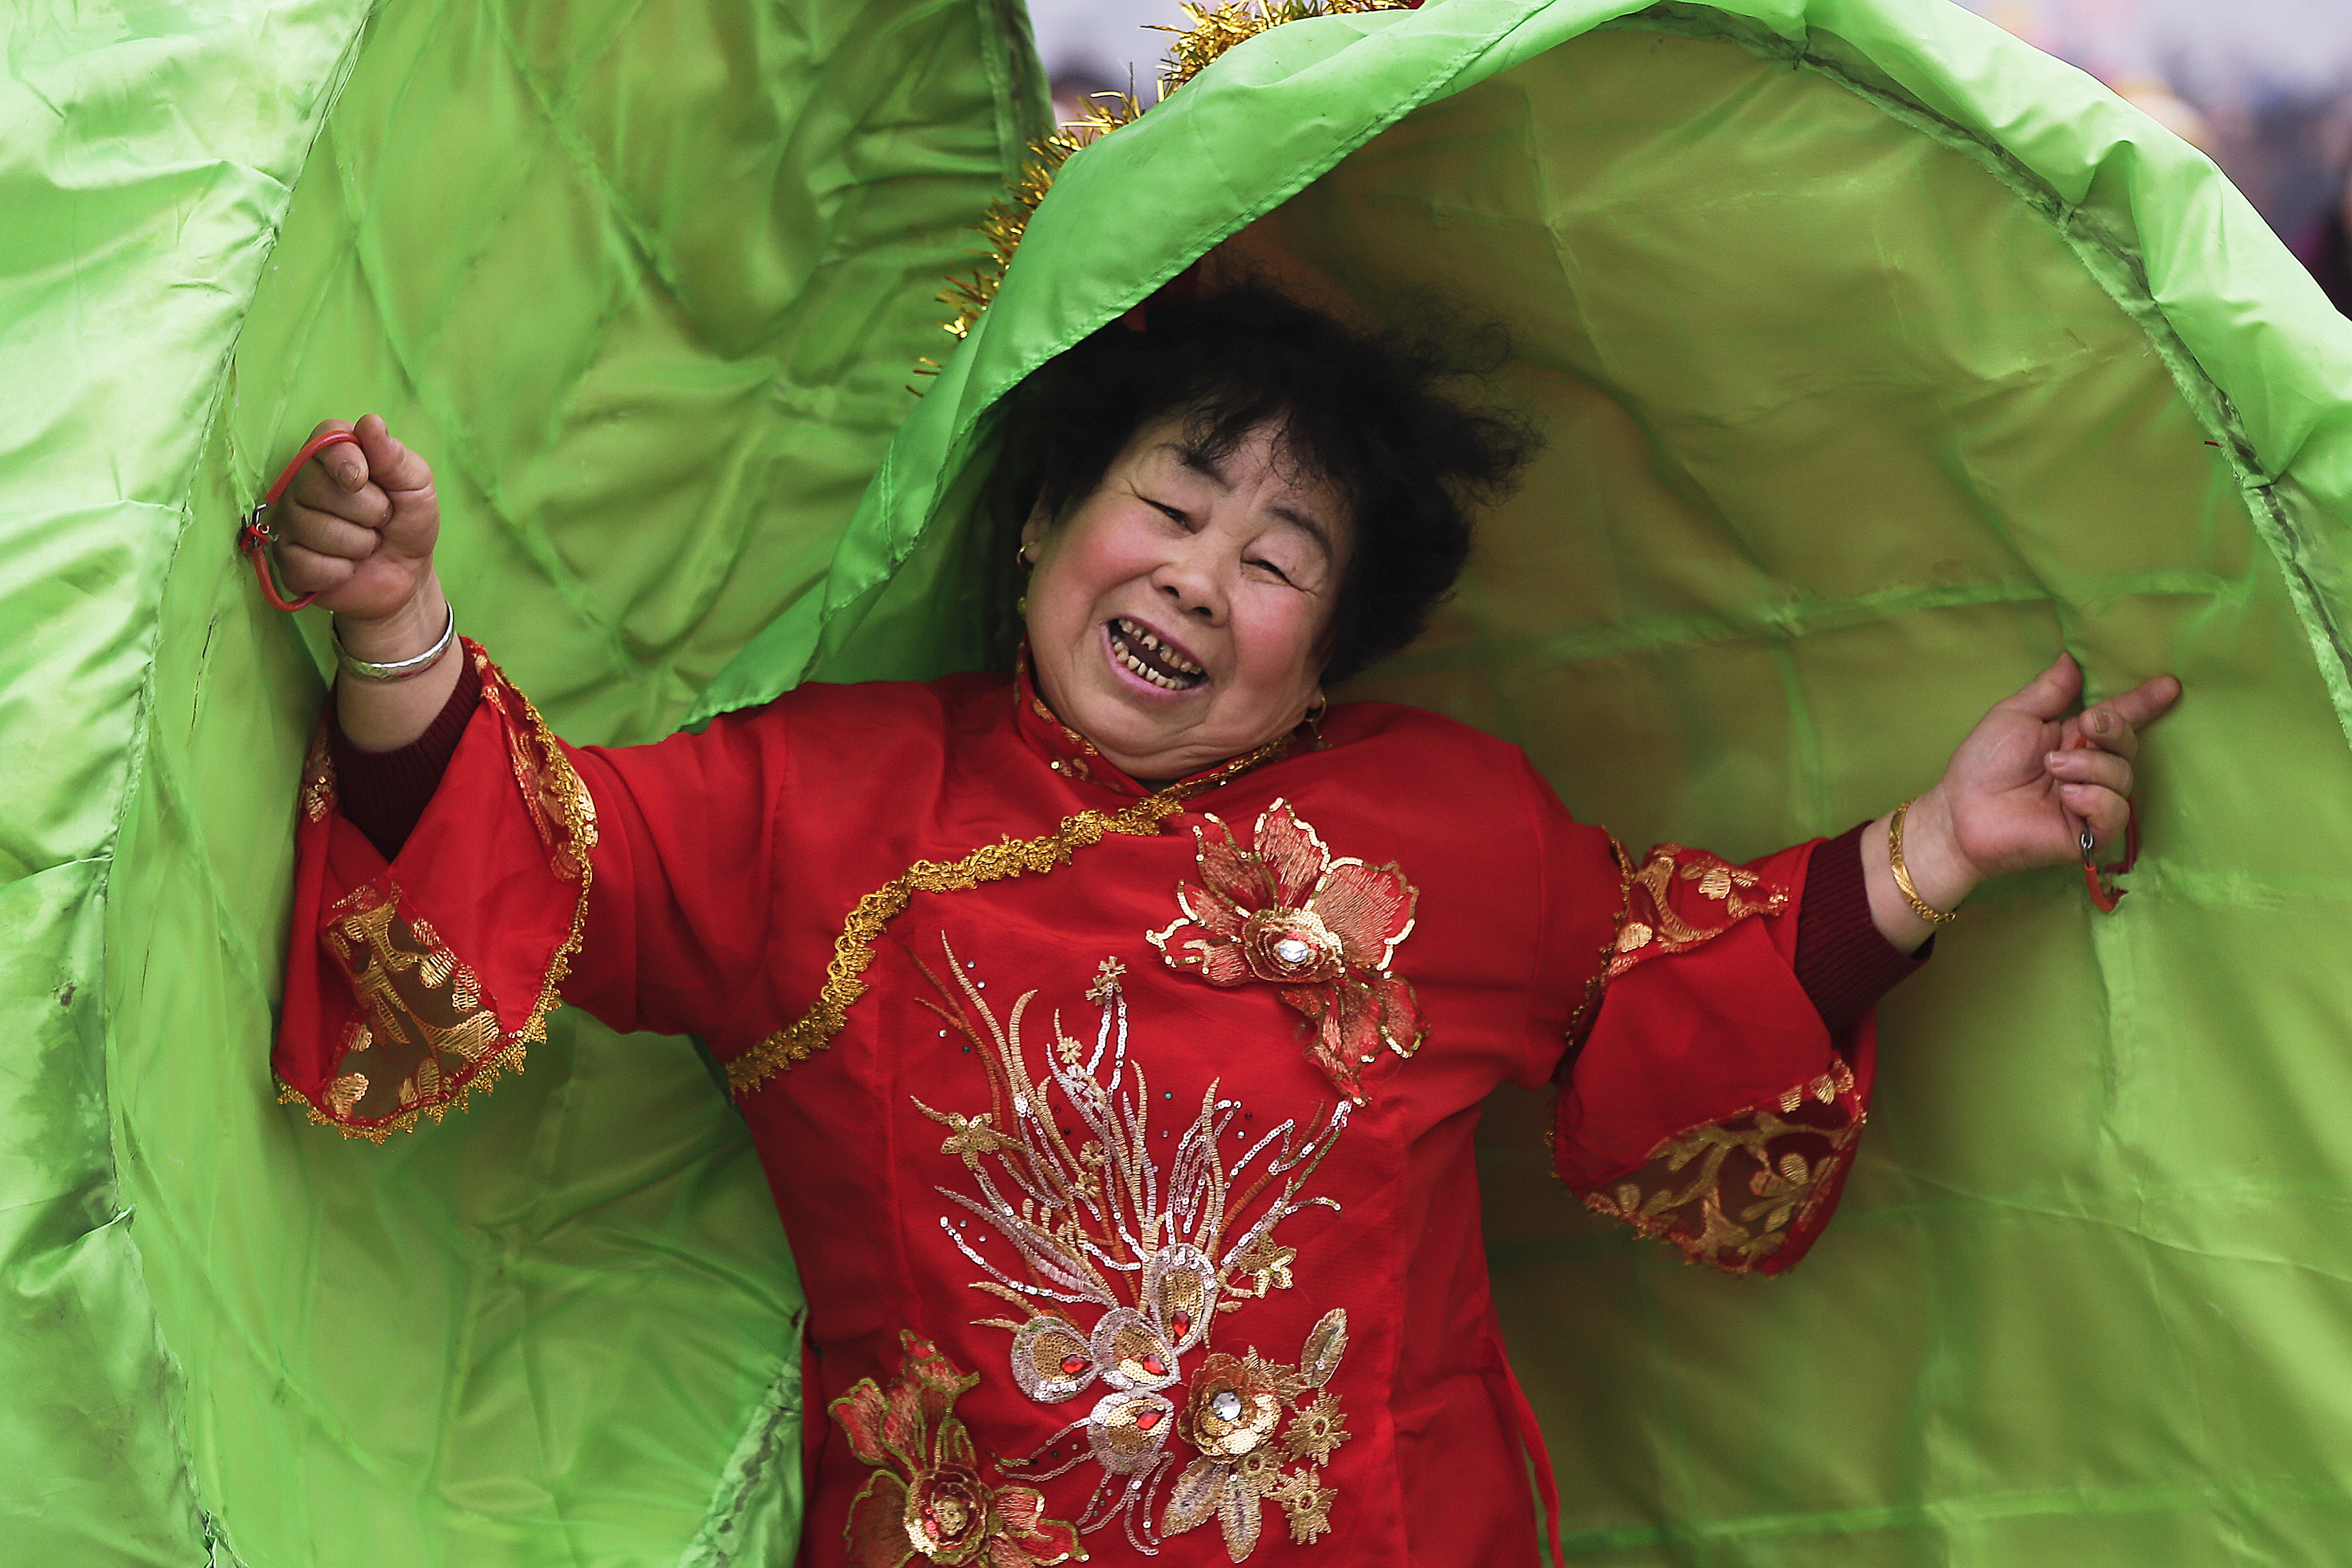 A performer dressed in traditional costume participates in a cultural dance during the Lantern Festival organized by city government at a square in Yufa town of Beijing's Daxing district, Tuesday, Feb. 19, 2019. Tuesday is the Lantern Festival in China, the final day of the annual celebration of the Chinese Lunar New Year. (AP Photo/Andy Wong)